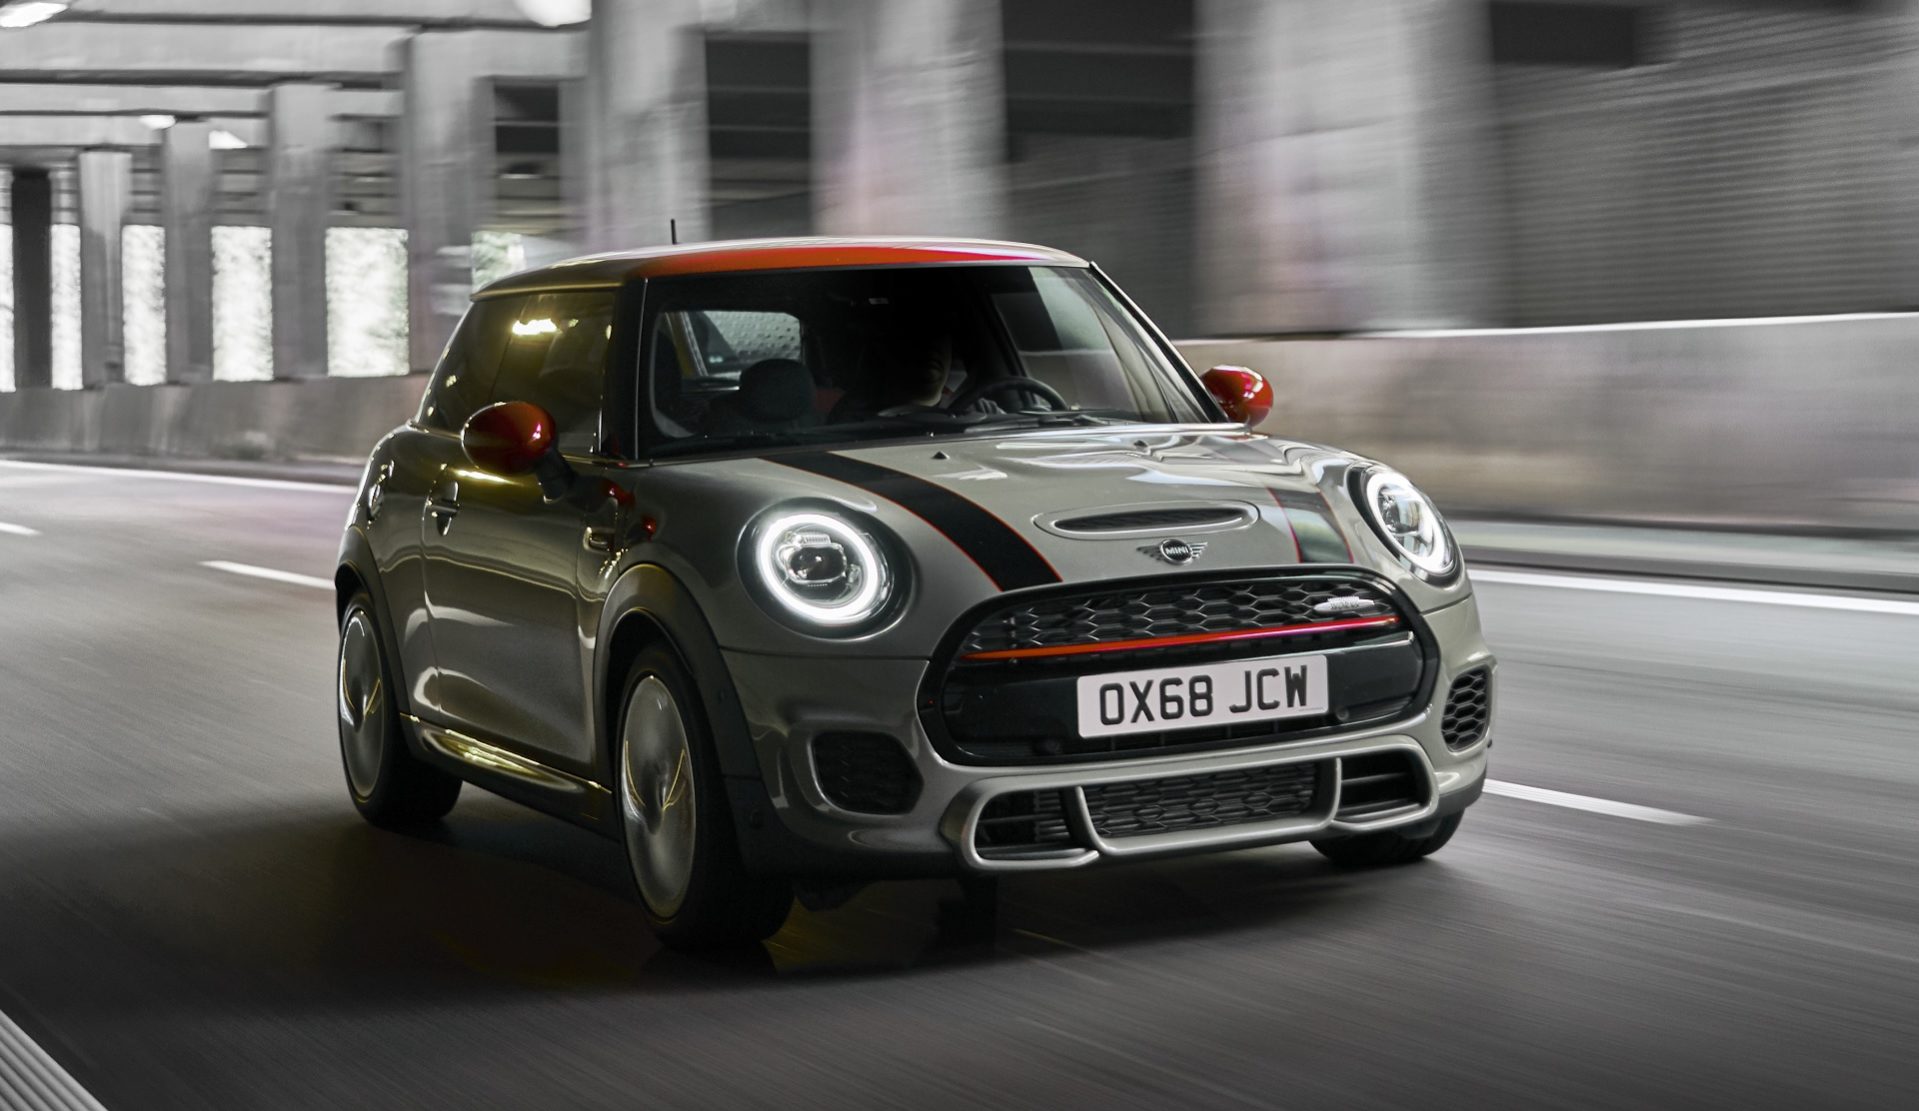 Mini John Cooper Works Launched In India At Rs 43.5 Lakh | CarSaar